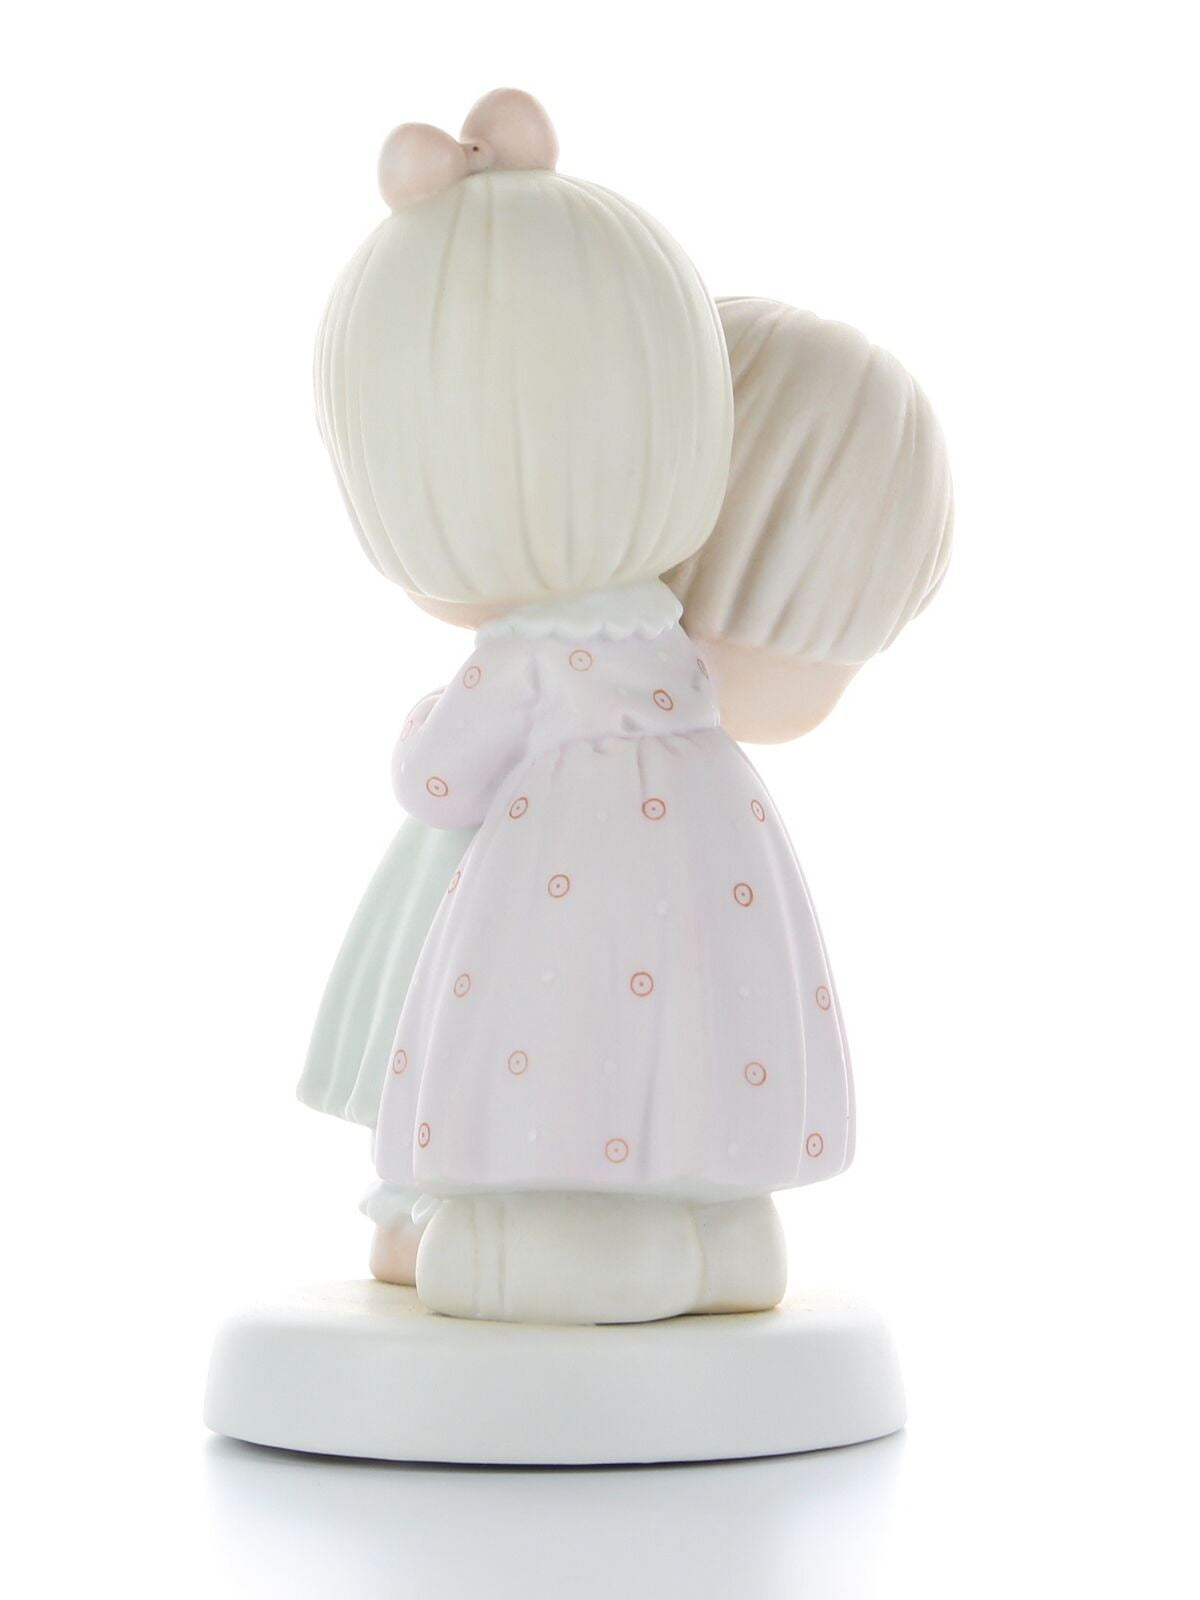 Precious Moments Enesco Porcelain Figurine Thatâ€™s What Friends Are For 521183